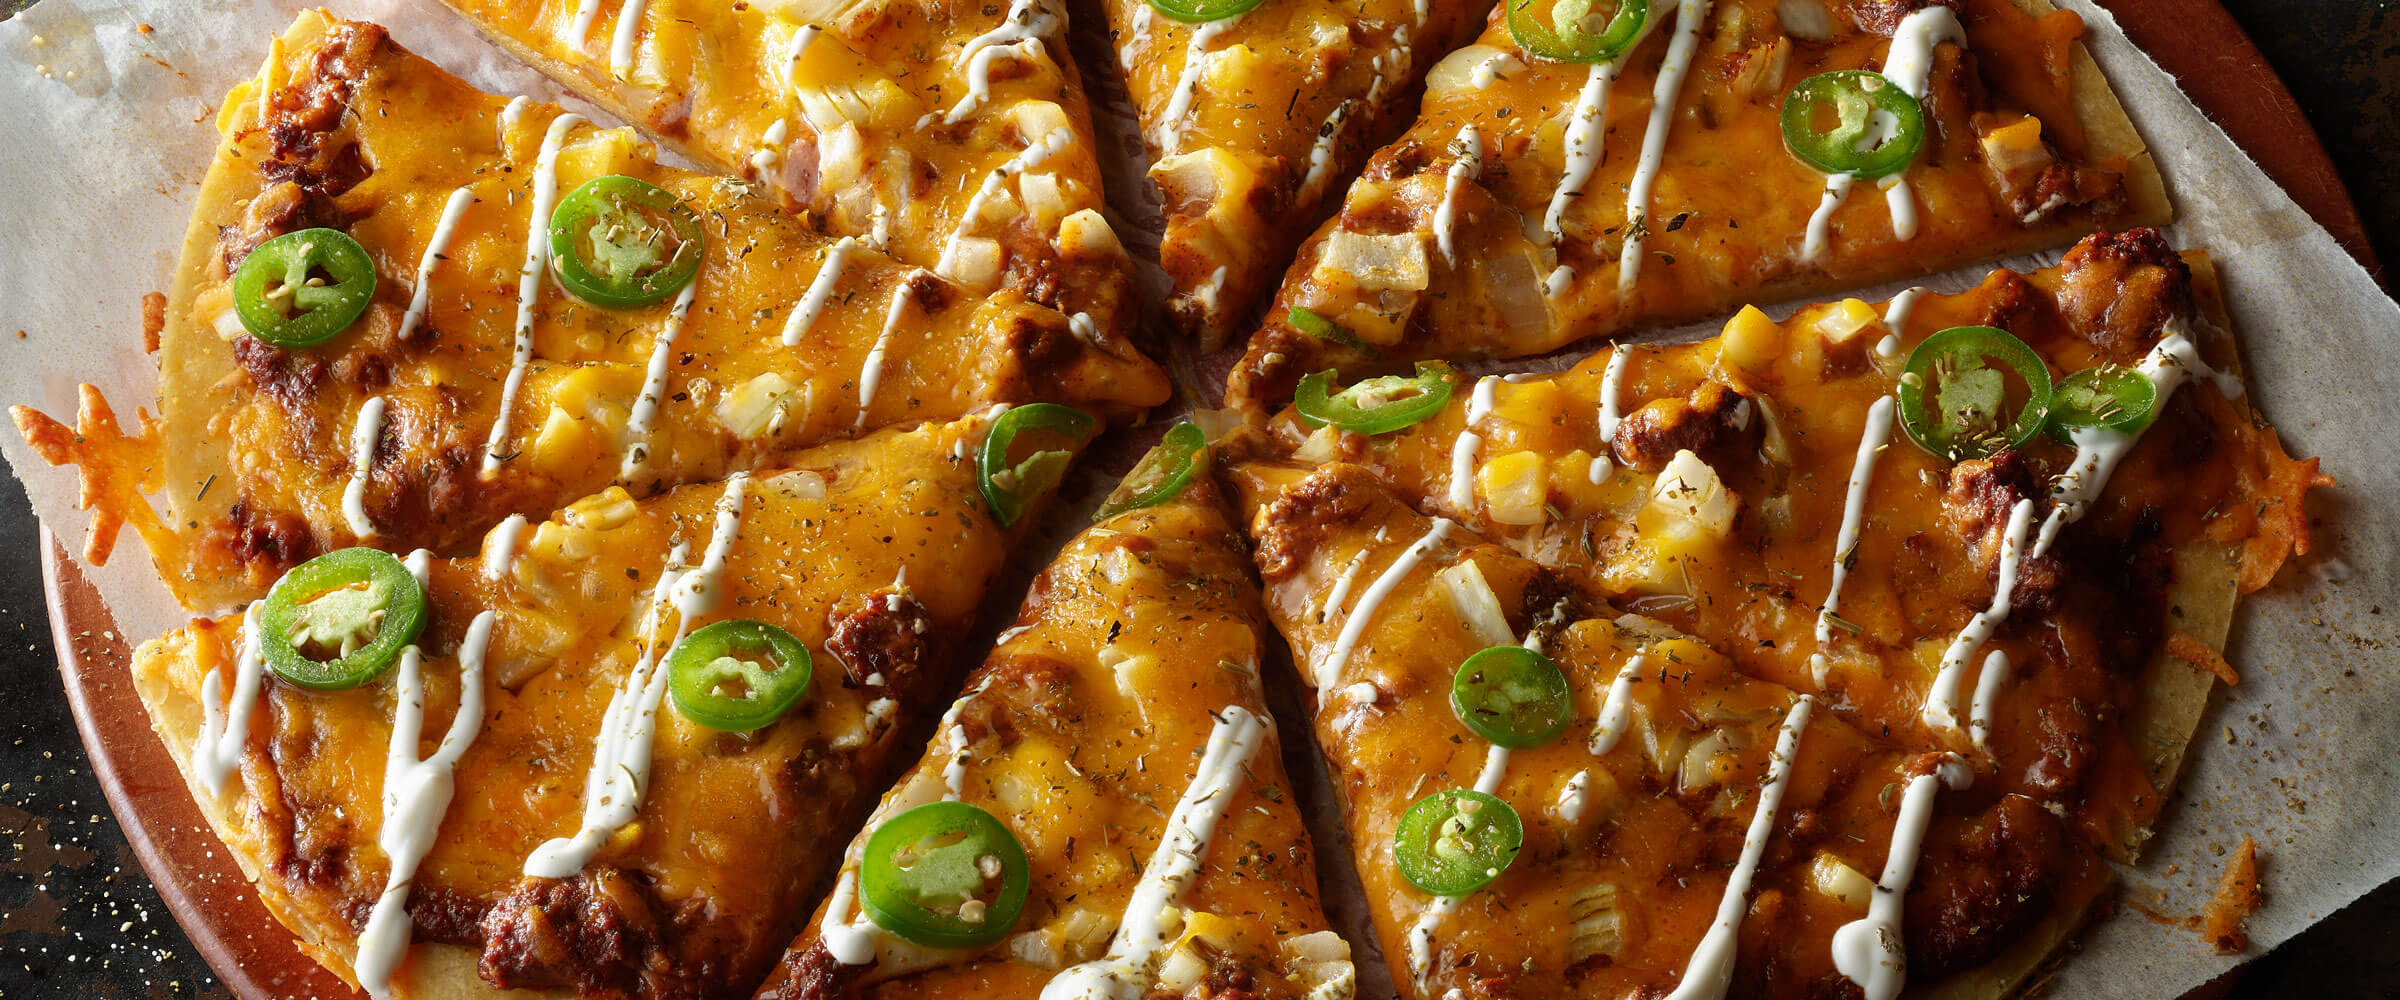 Chili Pizza Delight on pie pan topped with sour cream drizzle and jalapenos